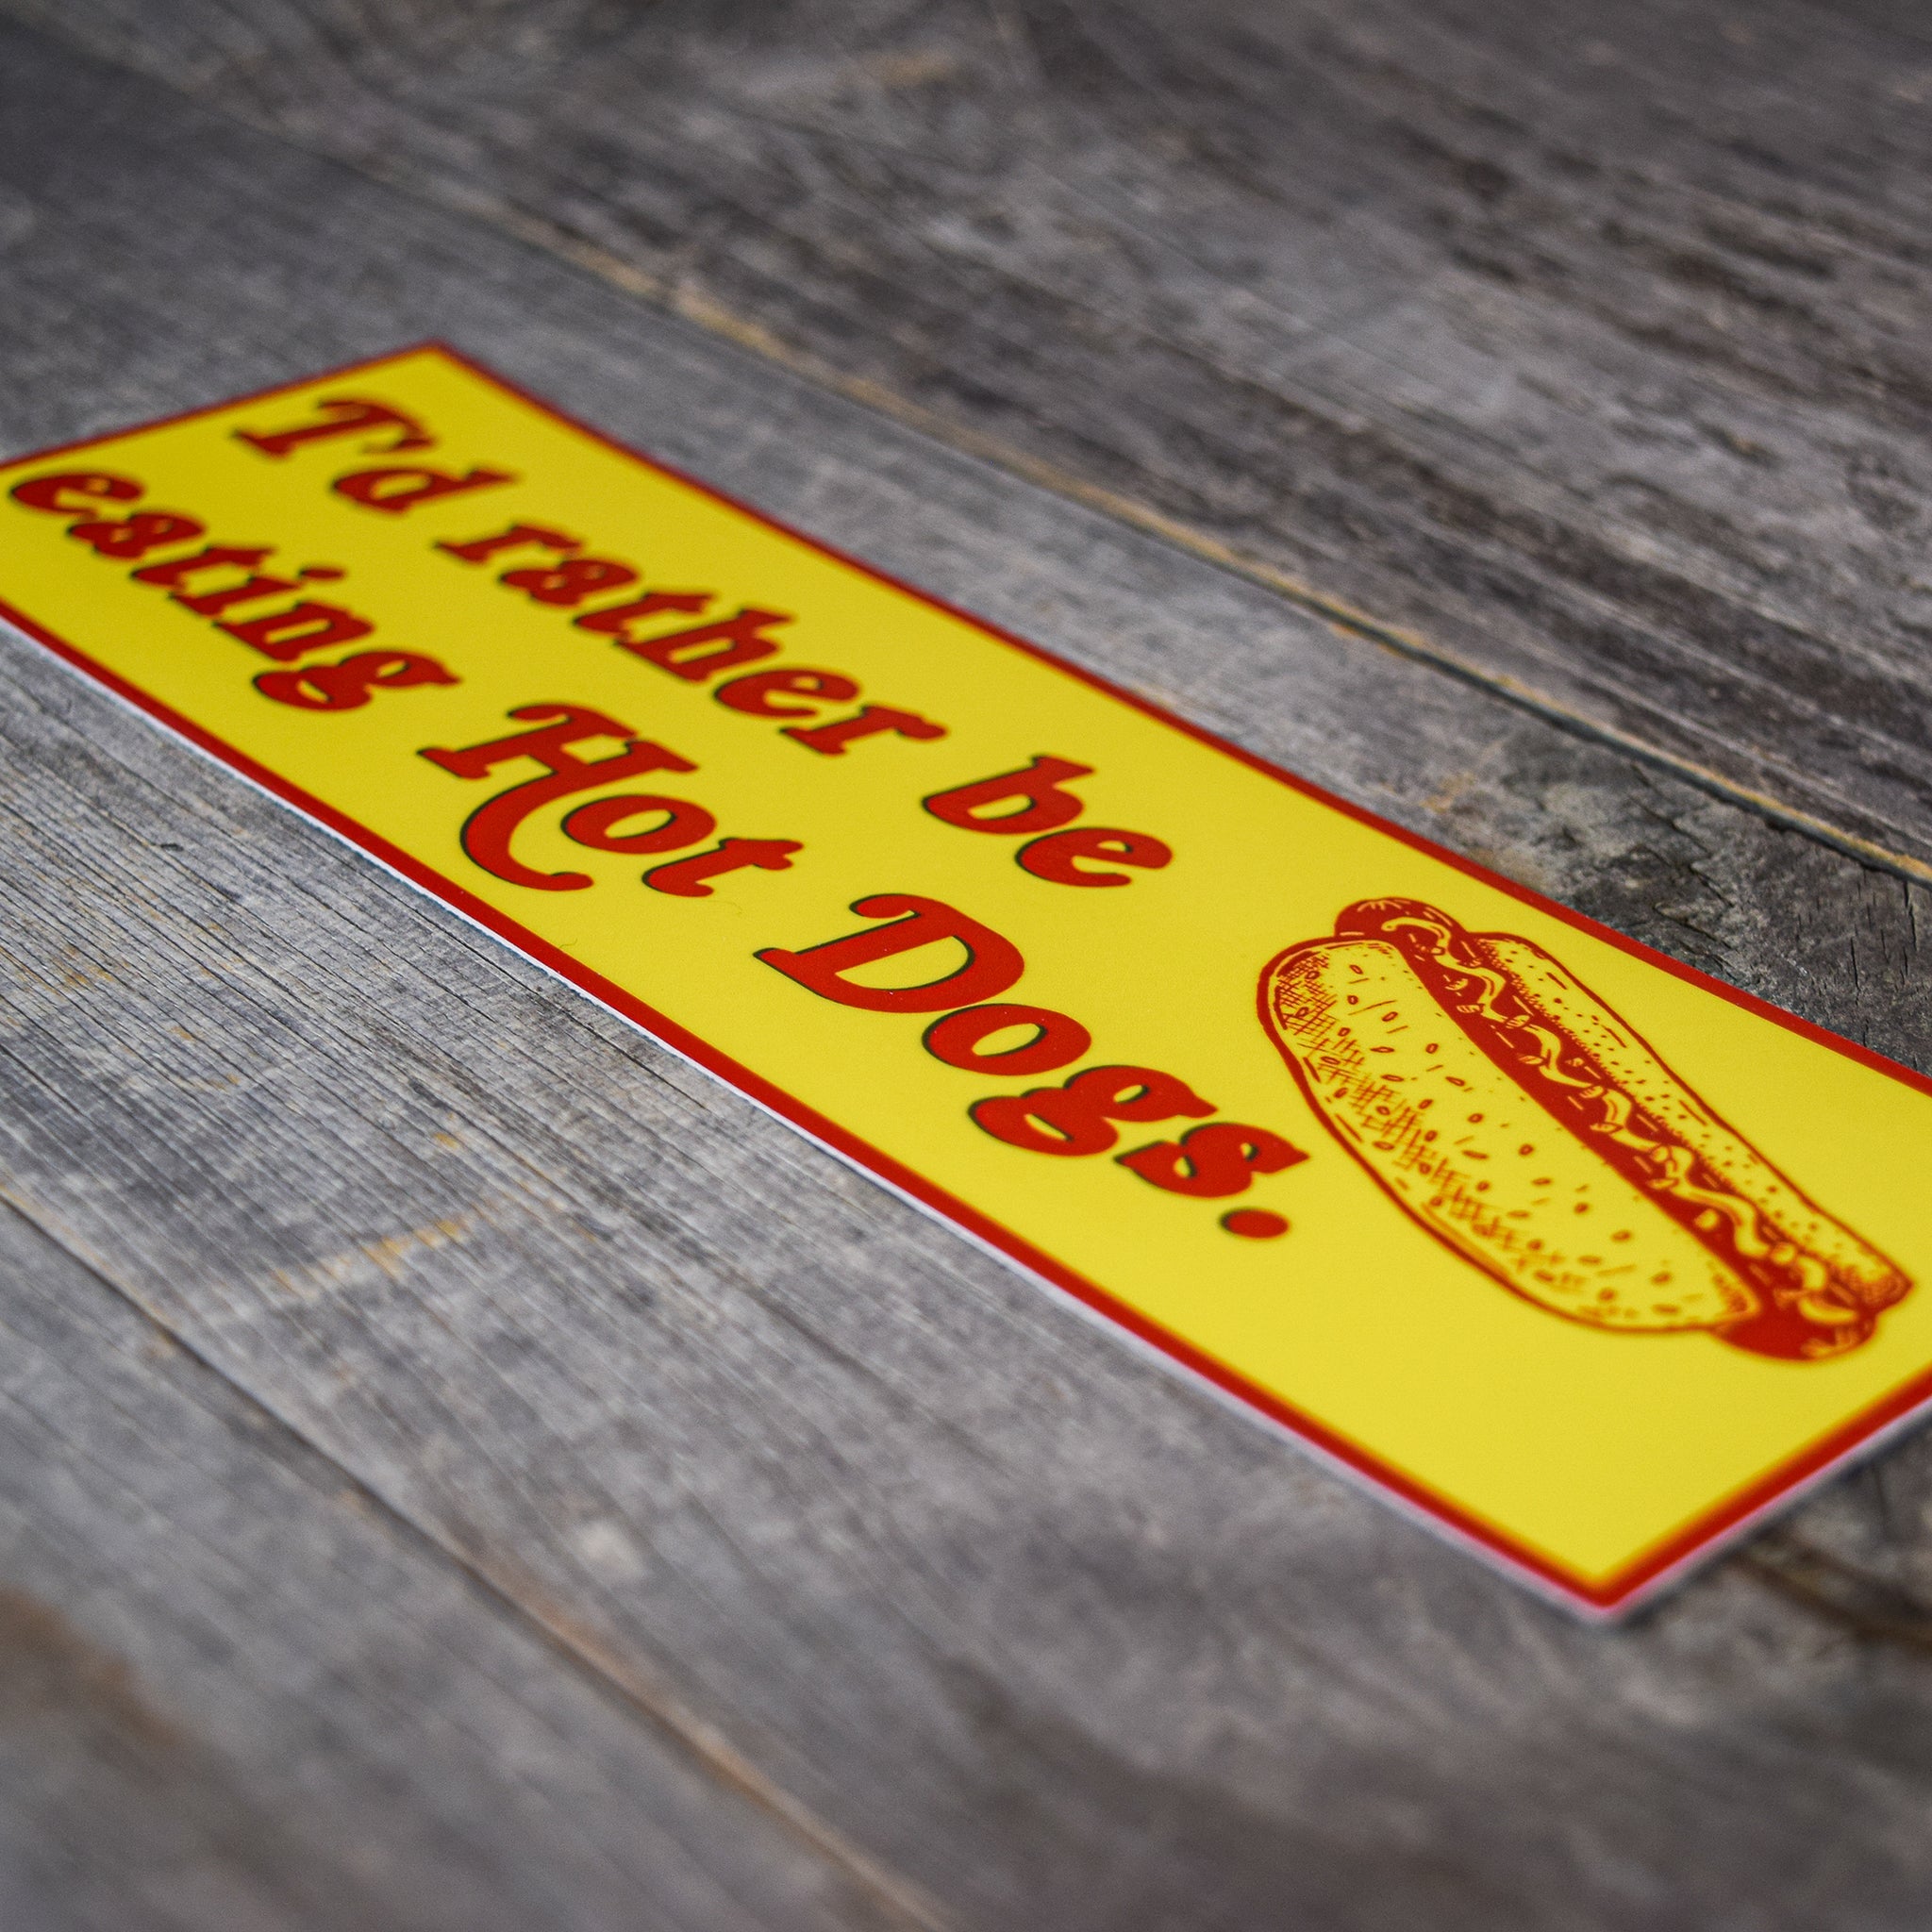 I'd Rather Be Eating Hot Dogs Vinyl Sticker